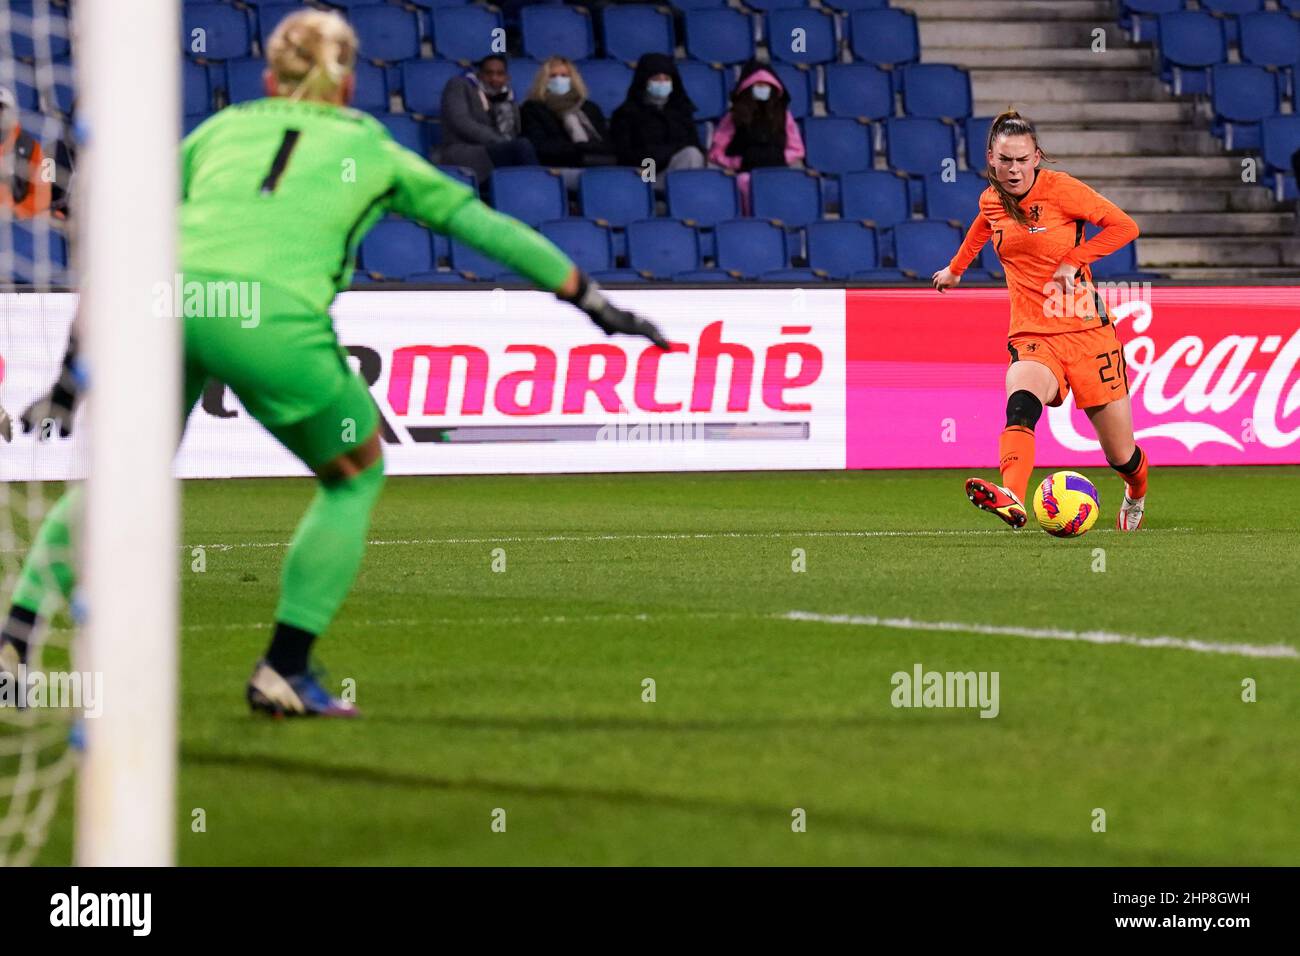 LE HAVRE, FRANCE - FEBRUARY 19: Romee Leuchter of the Netherlands during the Tournoi de France 2022 match between Finland and Netherlands at Stade Oceane on February 19, 2022 in Le Havre, France (Photo by Rene Nijhuis/Orange Pictures) Stock Photo